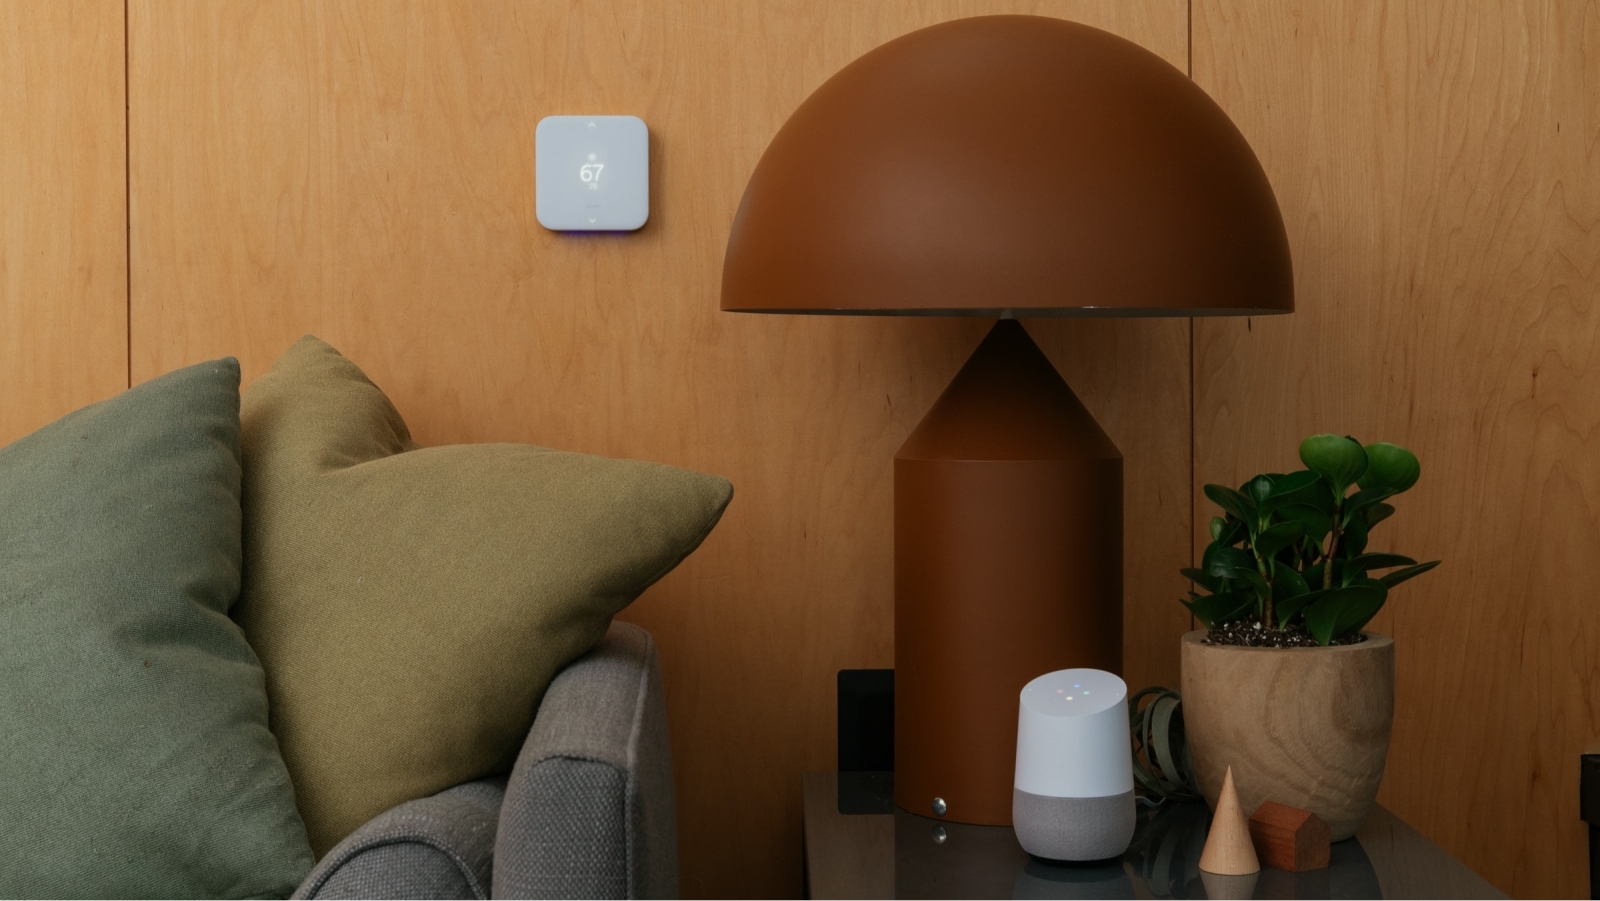 Vivint Smart Thermostat installed in a living room with a Google Home on a side table.